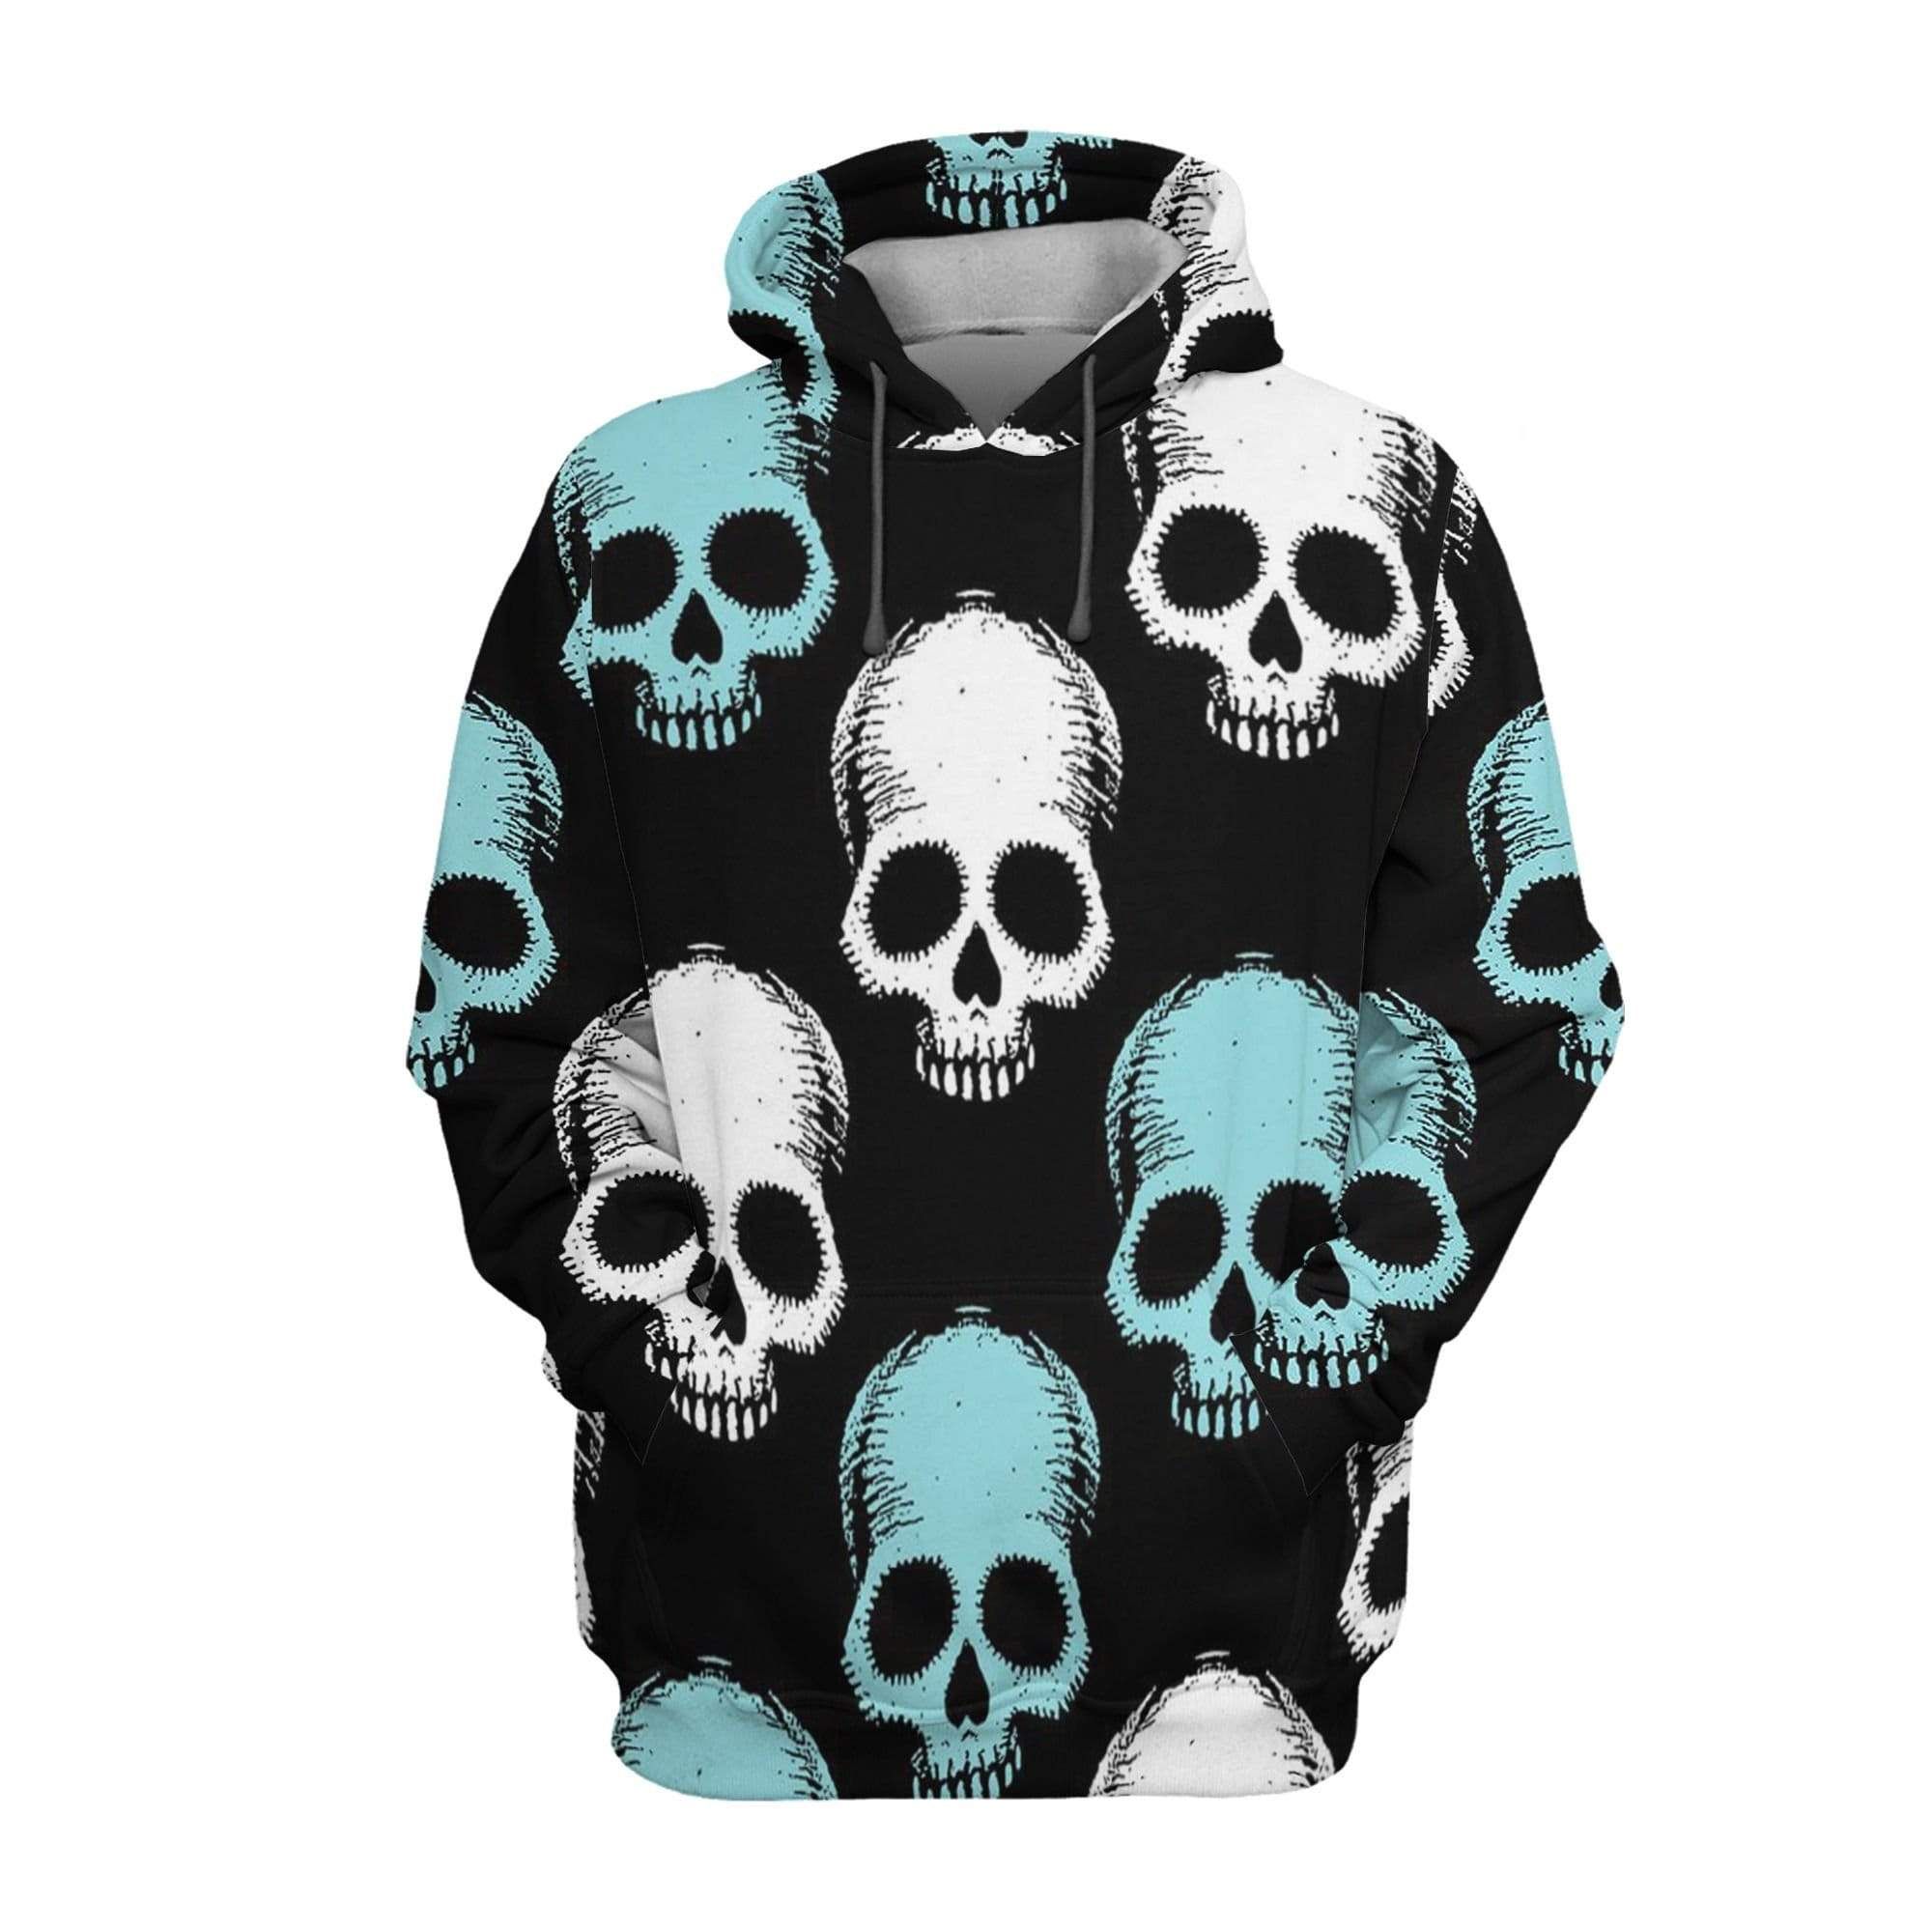 Turquoise Skull Unisex Hoodie 3D All Over Printed